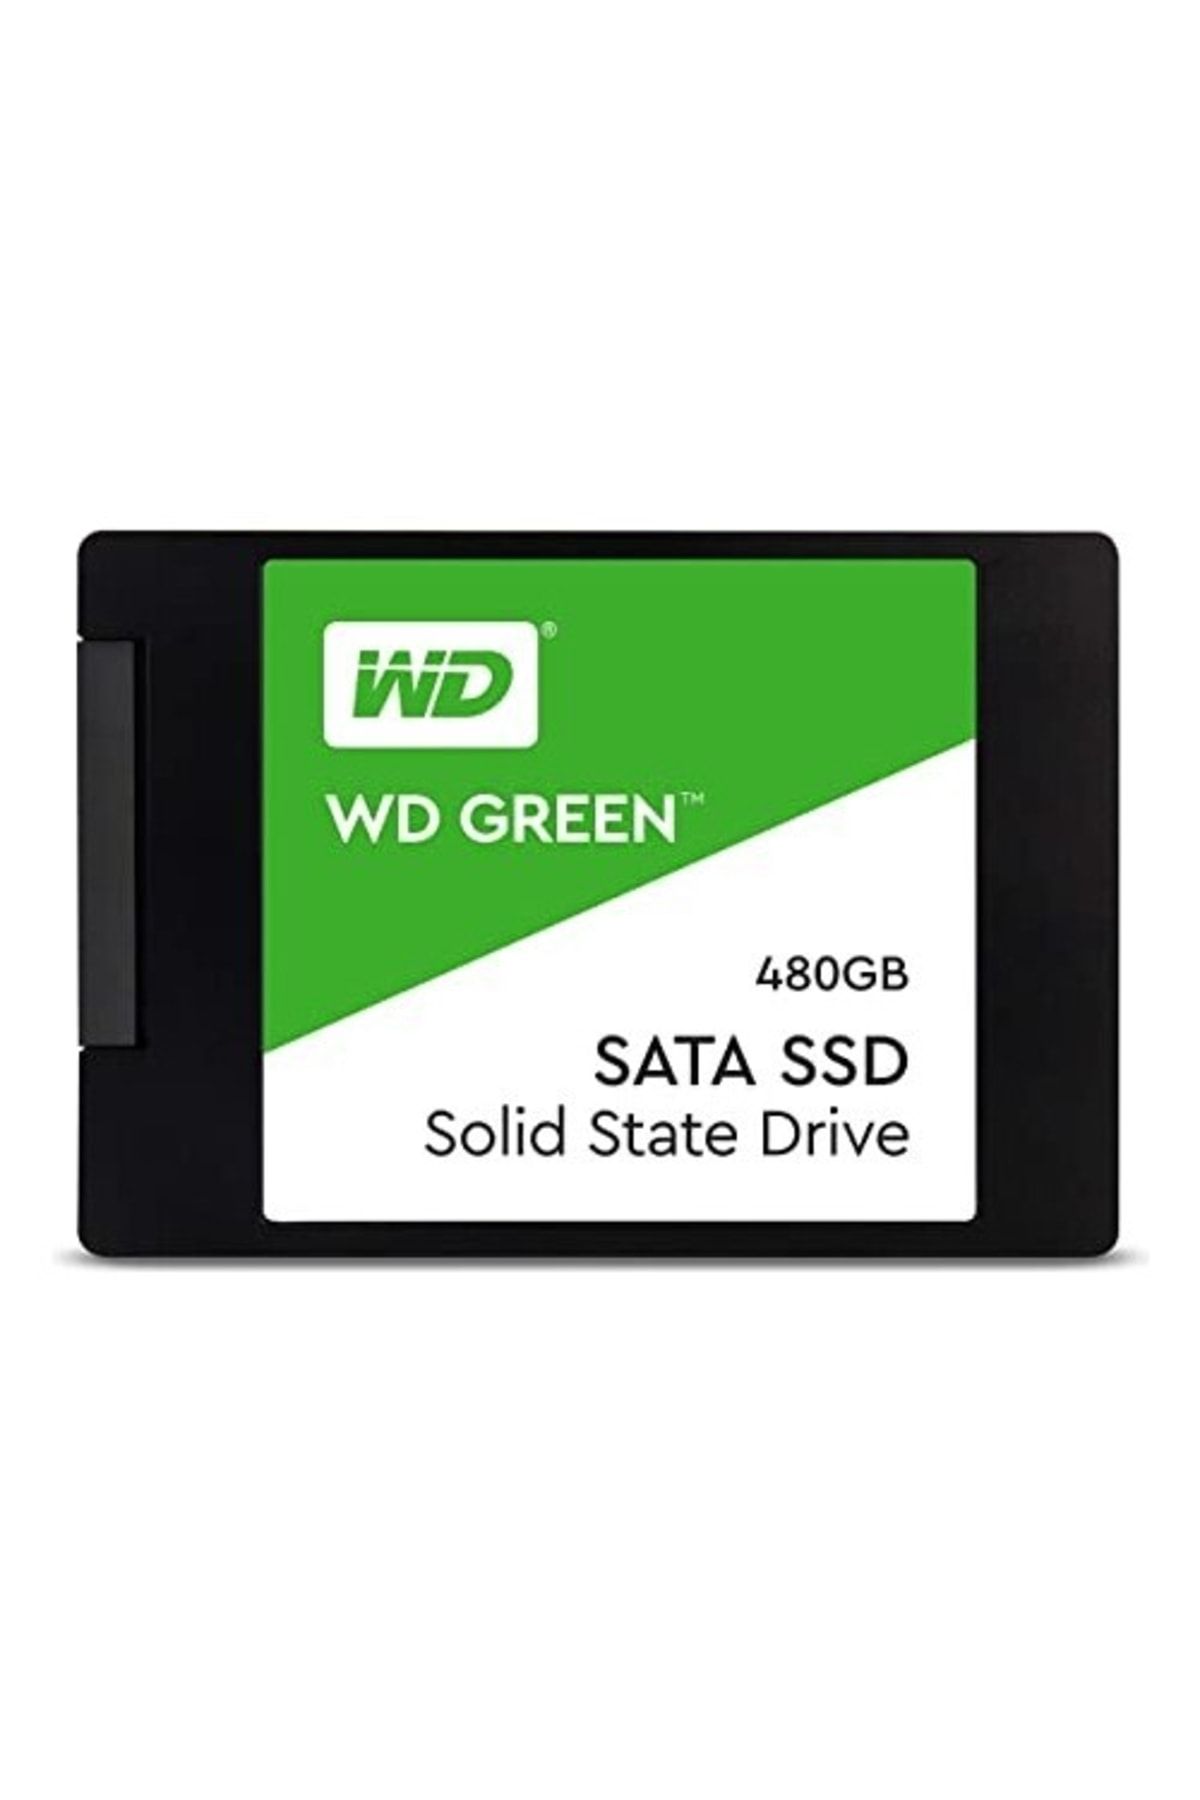 WD Wd 480gb Green Wds480g3g0a 545-465 3d Nand 25" Sata Ssd Harddisk